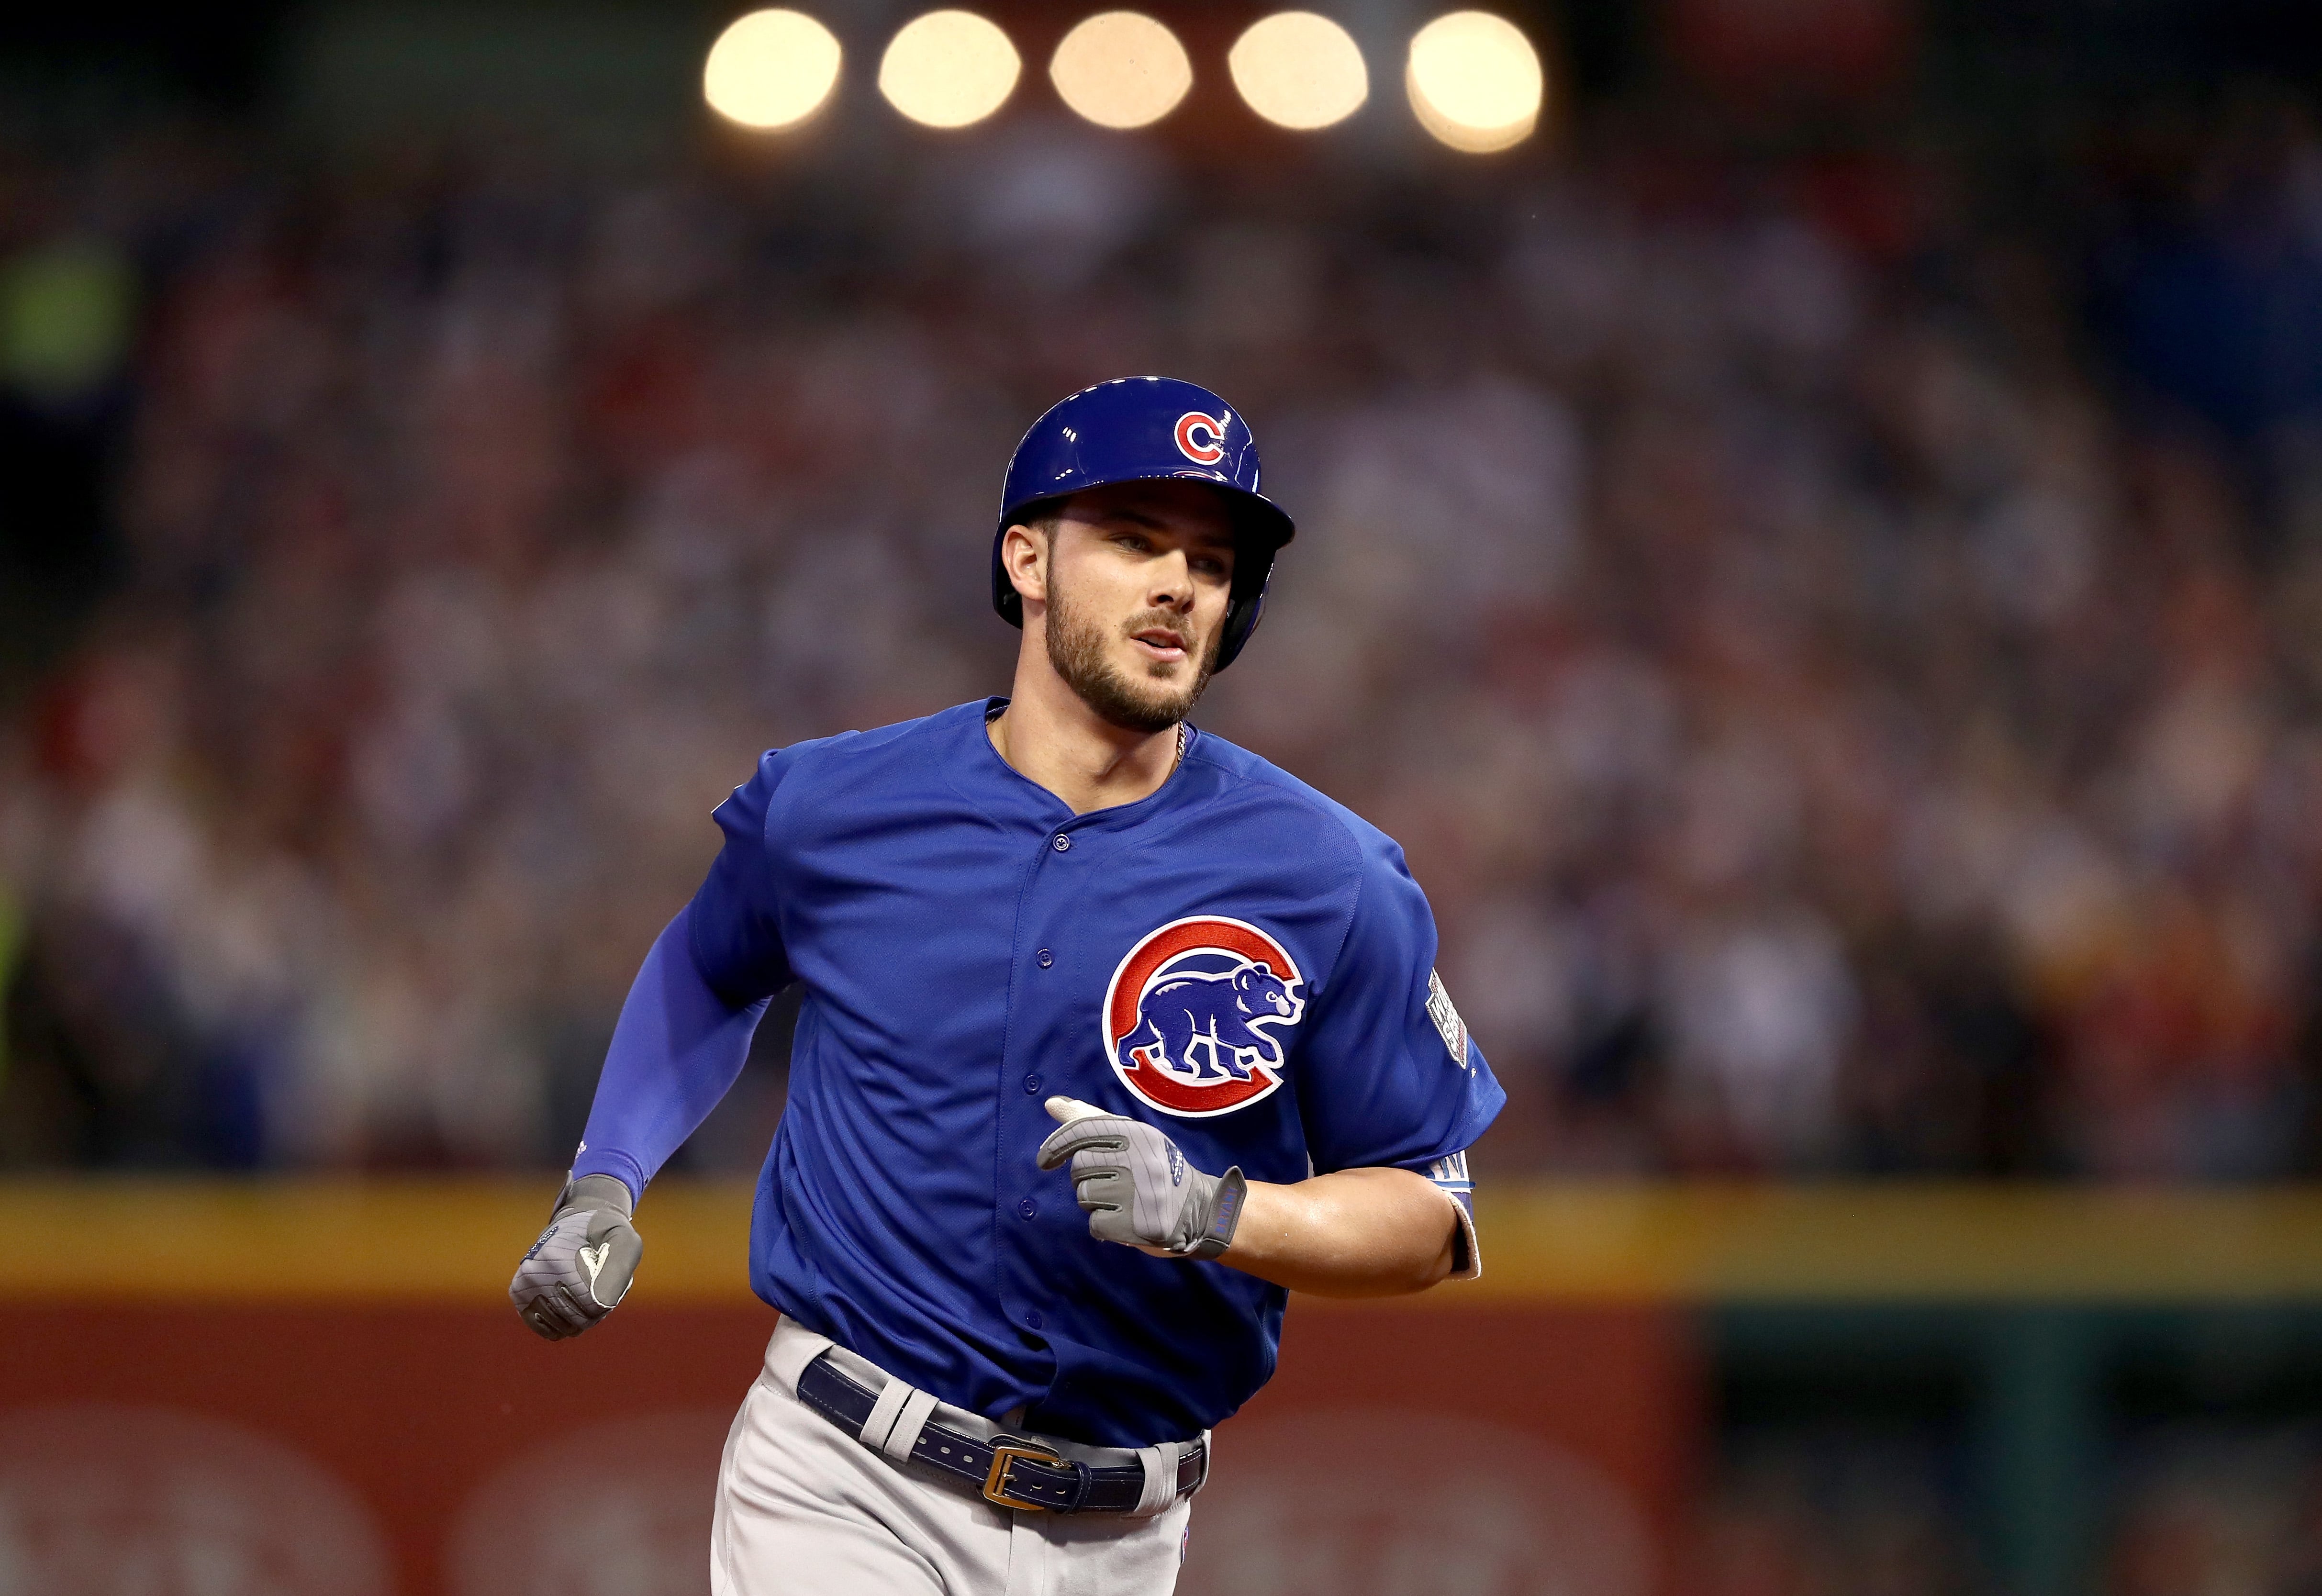 Kris Bryant is So 'Hot' in These Photos We Can't Handle It